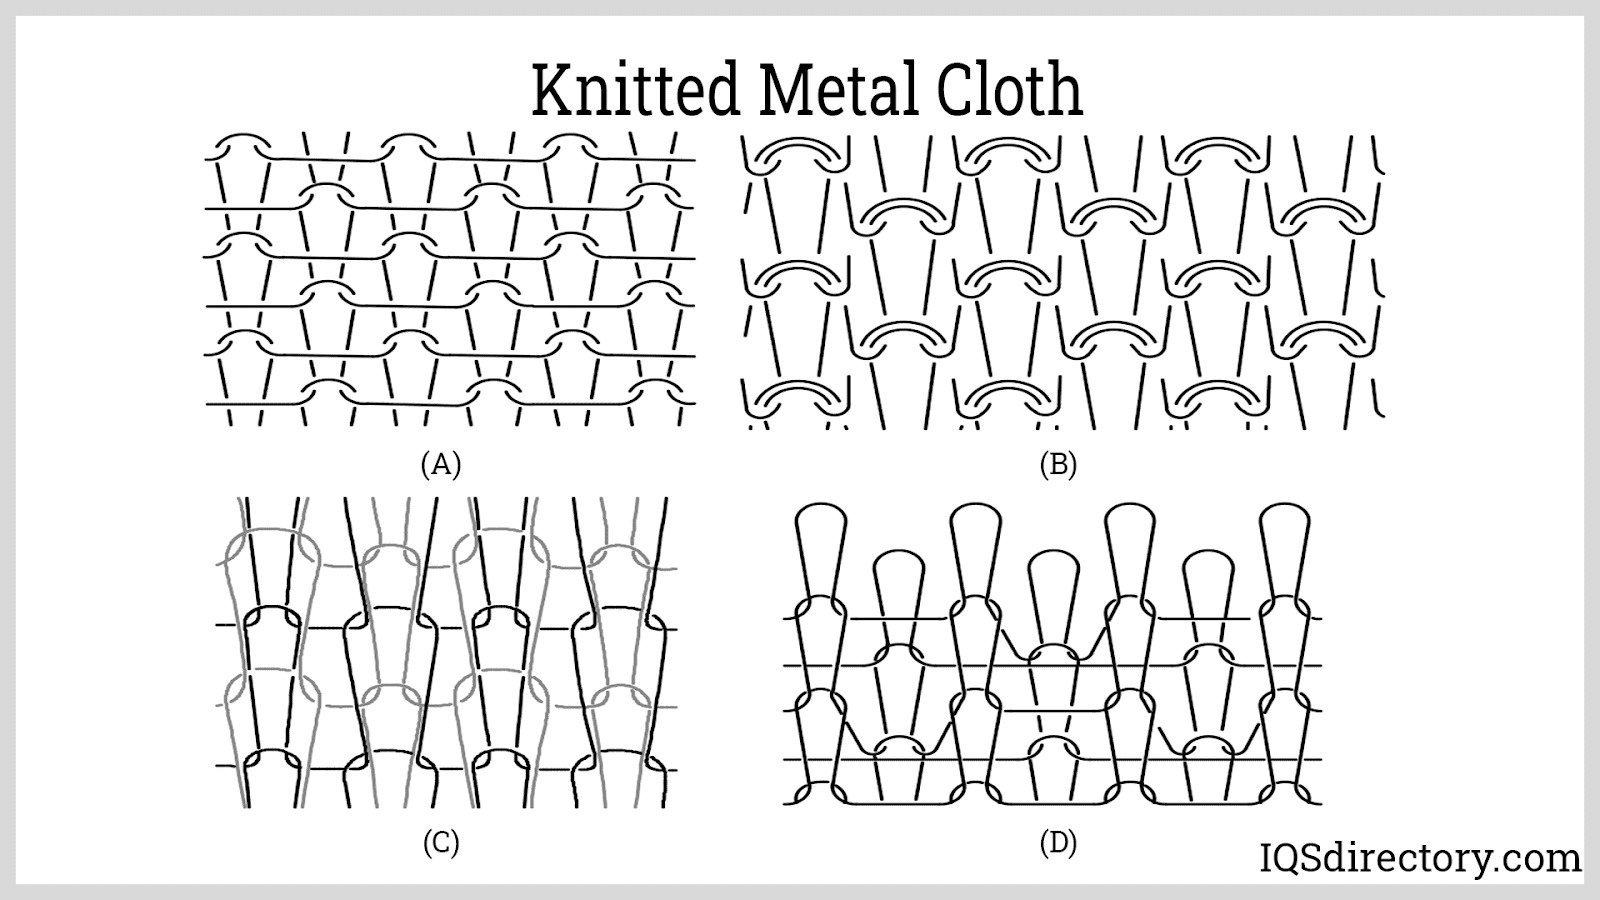 Knitted Metal Cloth